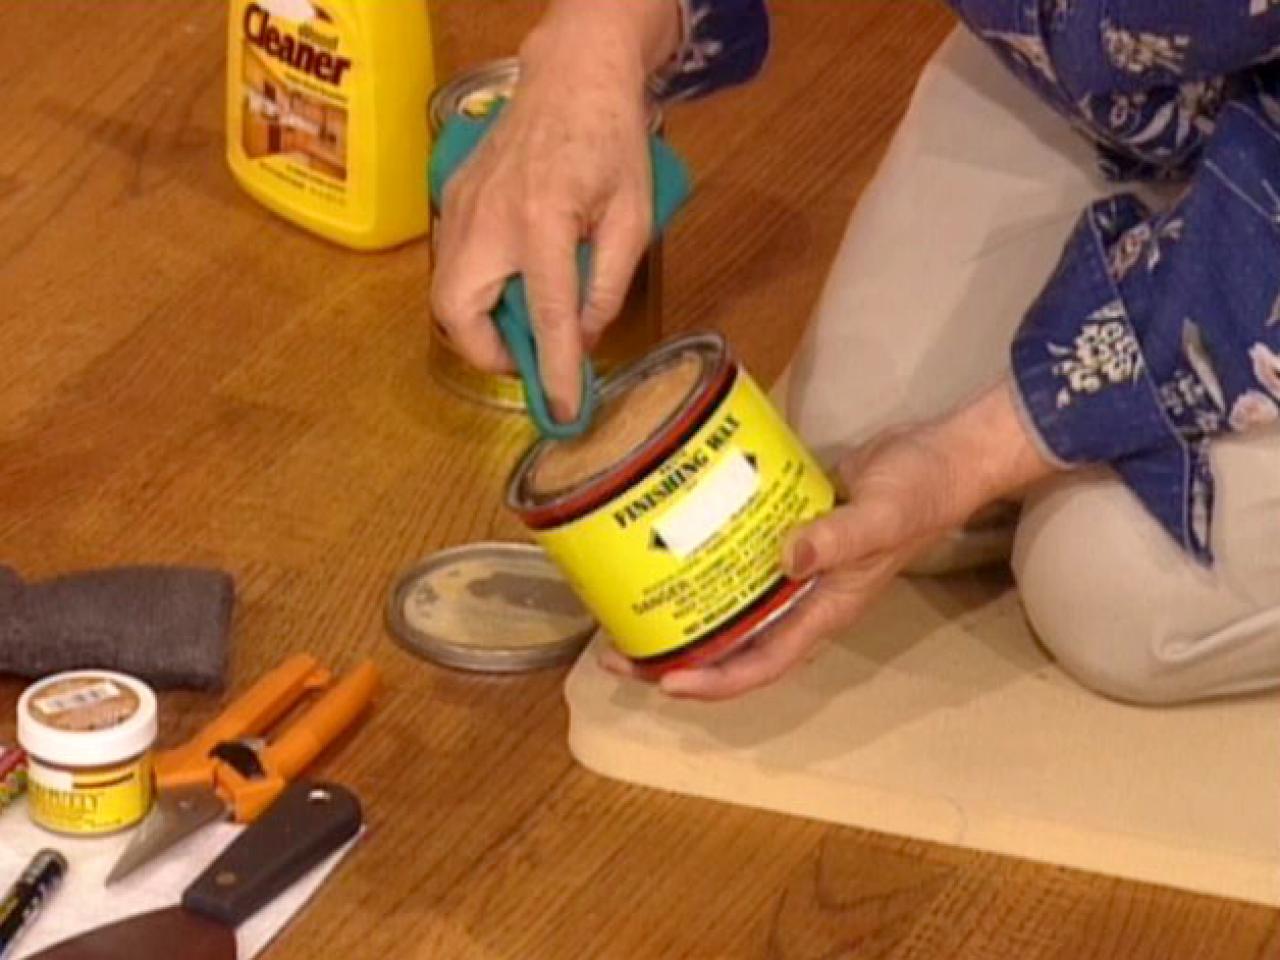 How To Touch Up Wood Floors Tos Diy, Stripping Wax From Hardwood Floors